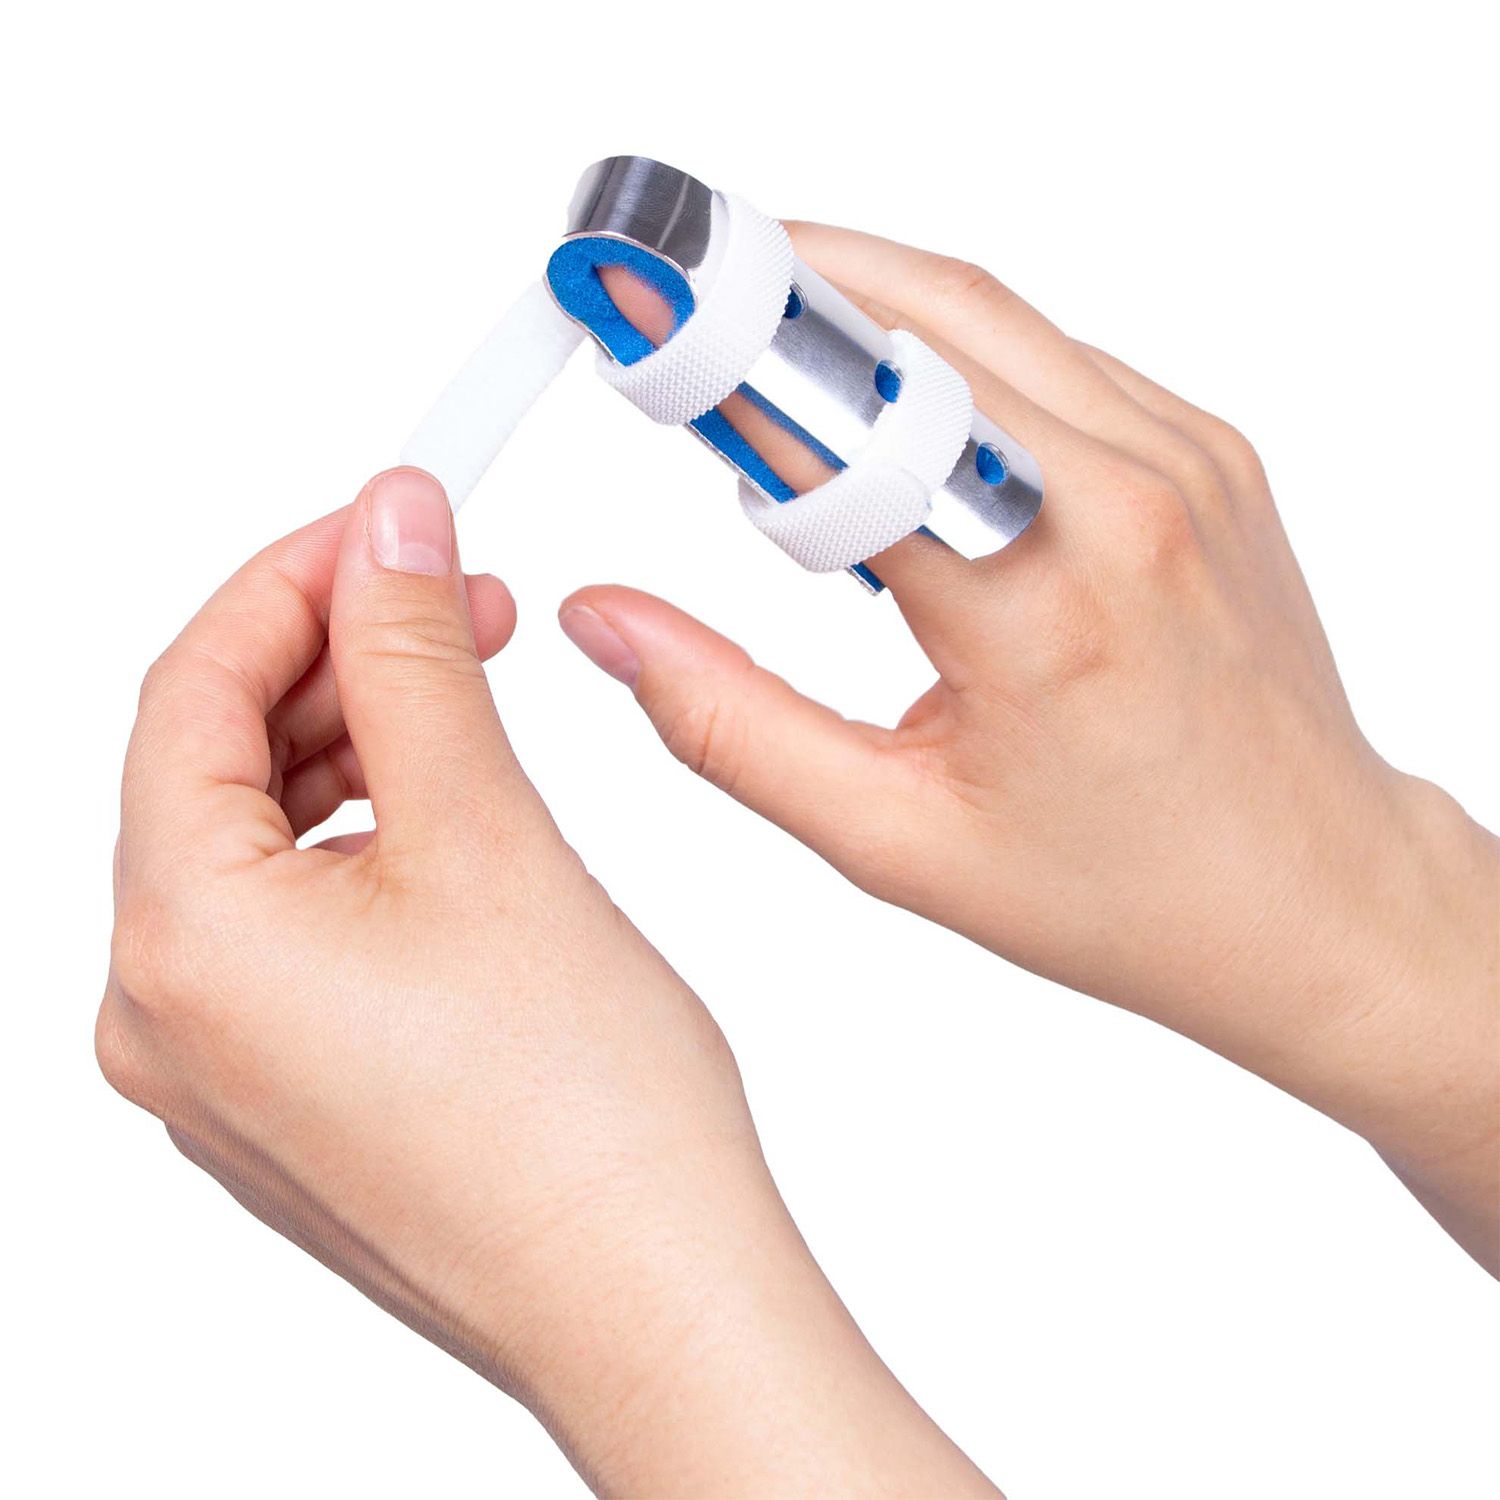 putting on the dunimed finger splint with strap